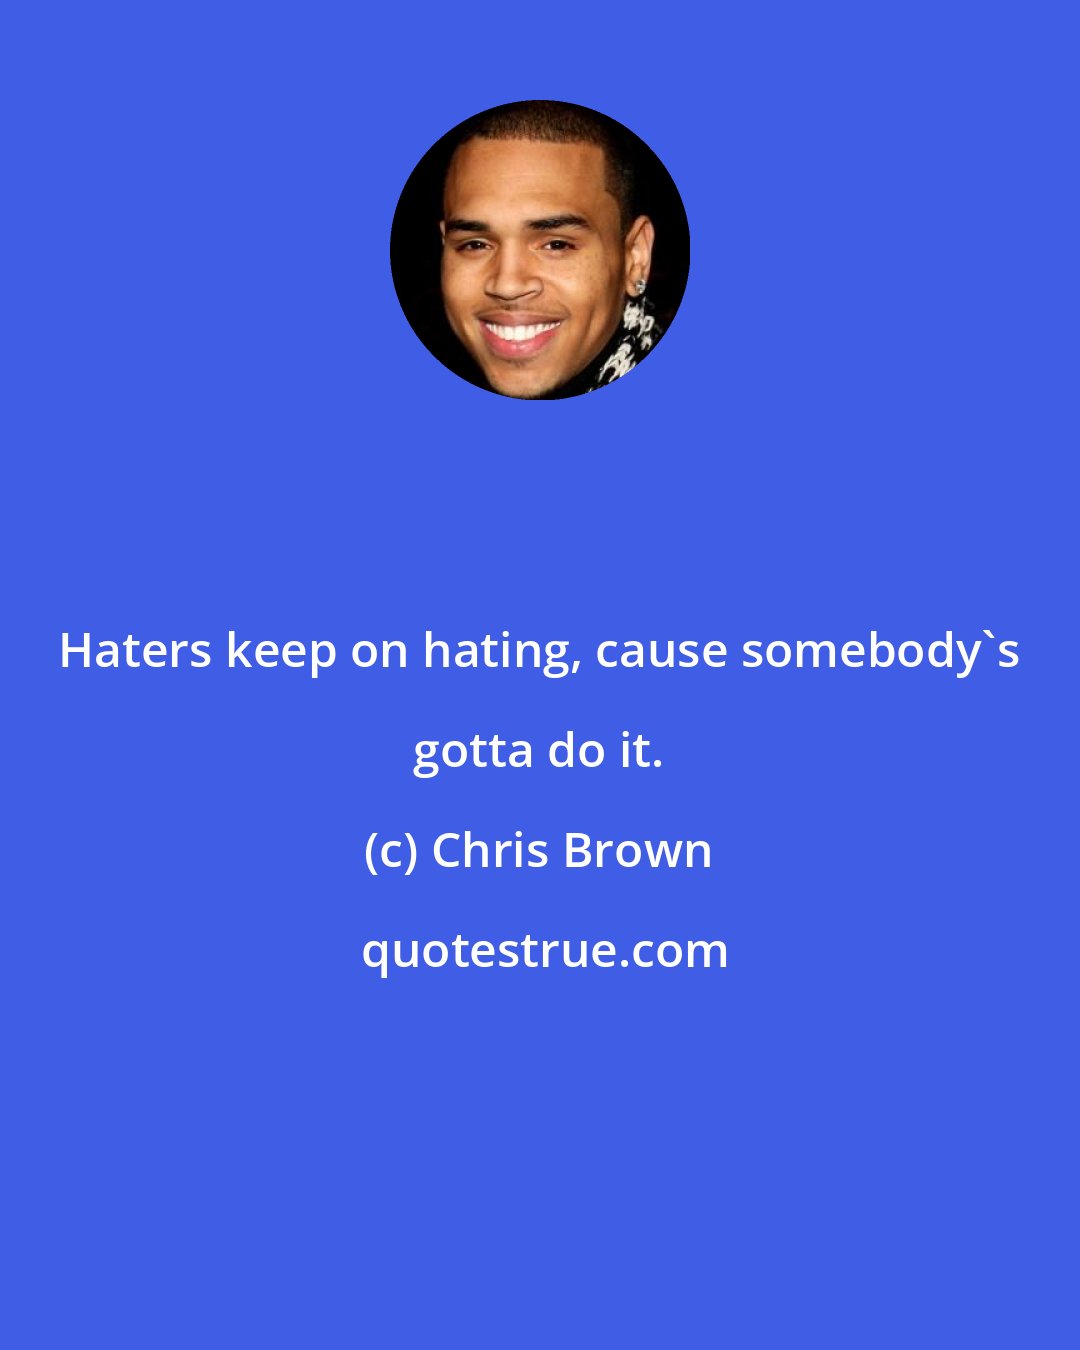 Chris Brown: Haters keep on hating, cause somebody's gotta do it.